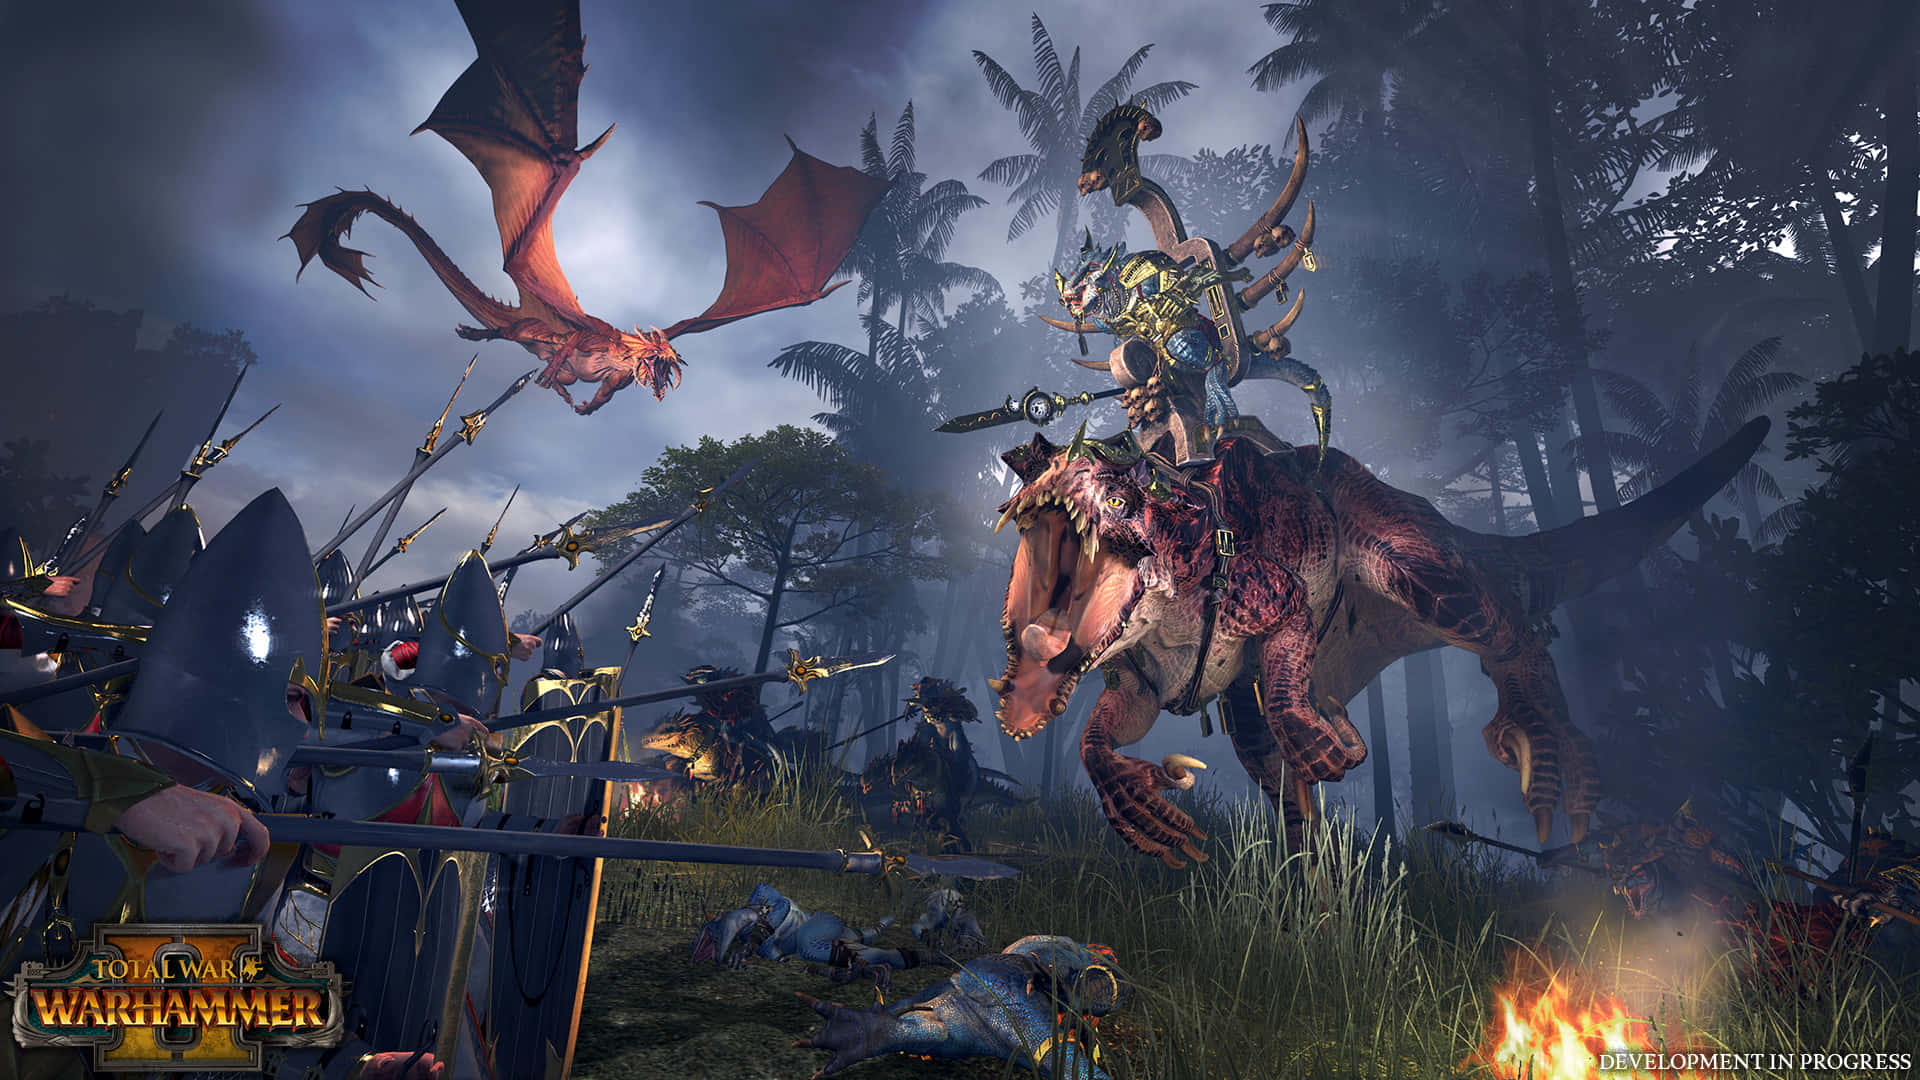 Experience Total War: Warhammer II in High Definition